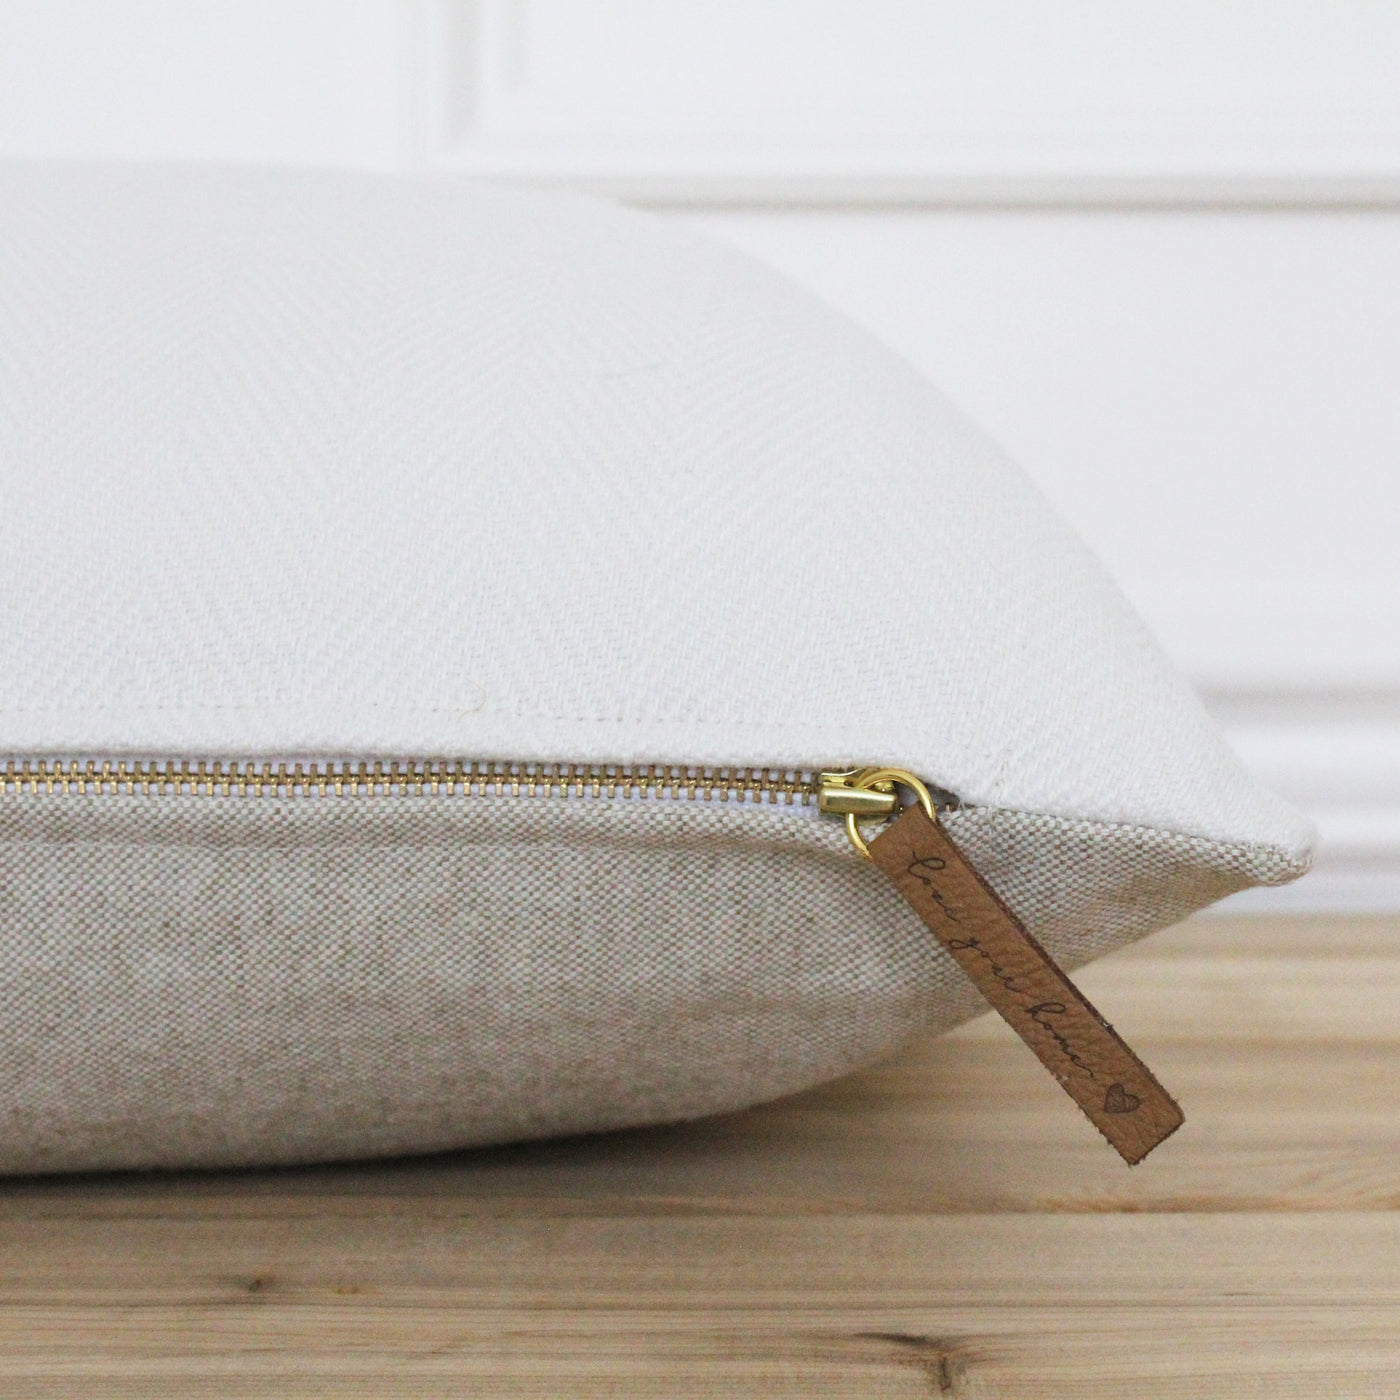 Designer Herringbone Pillow - white front, natural flax color back - leather zipper tag